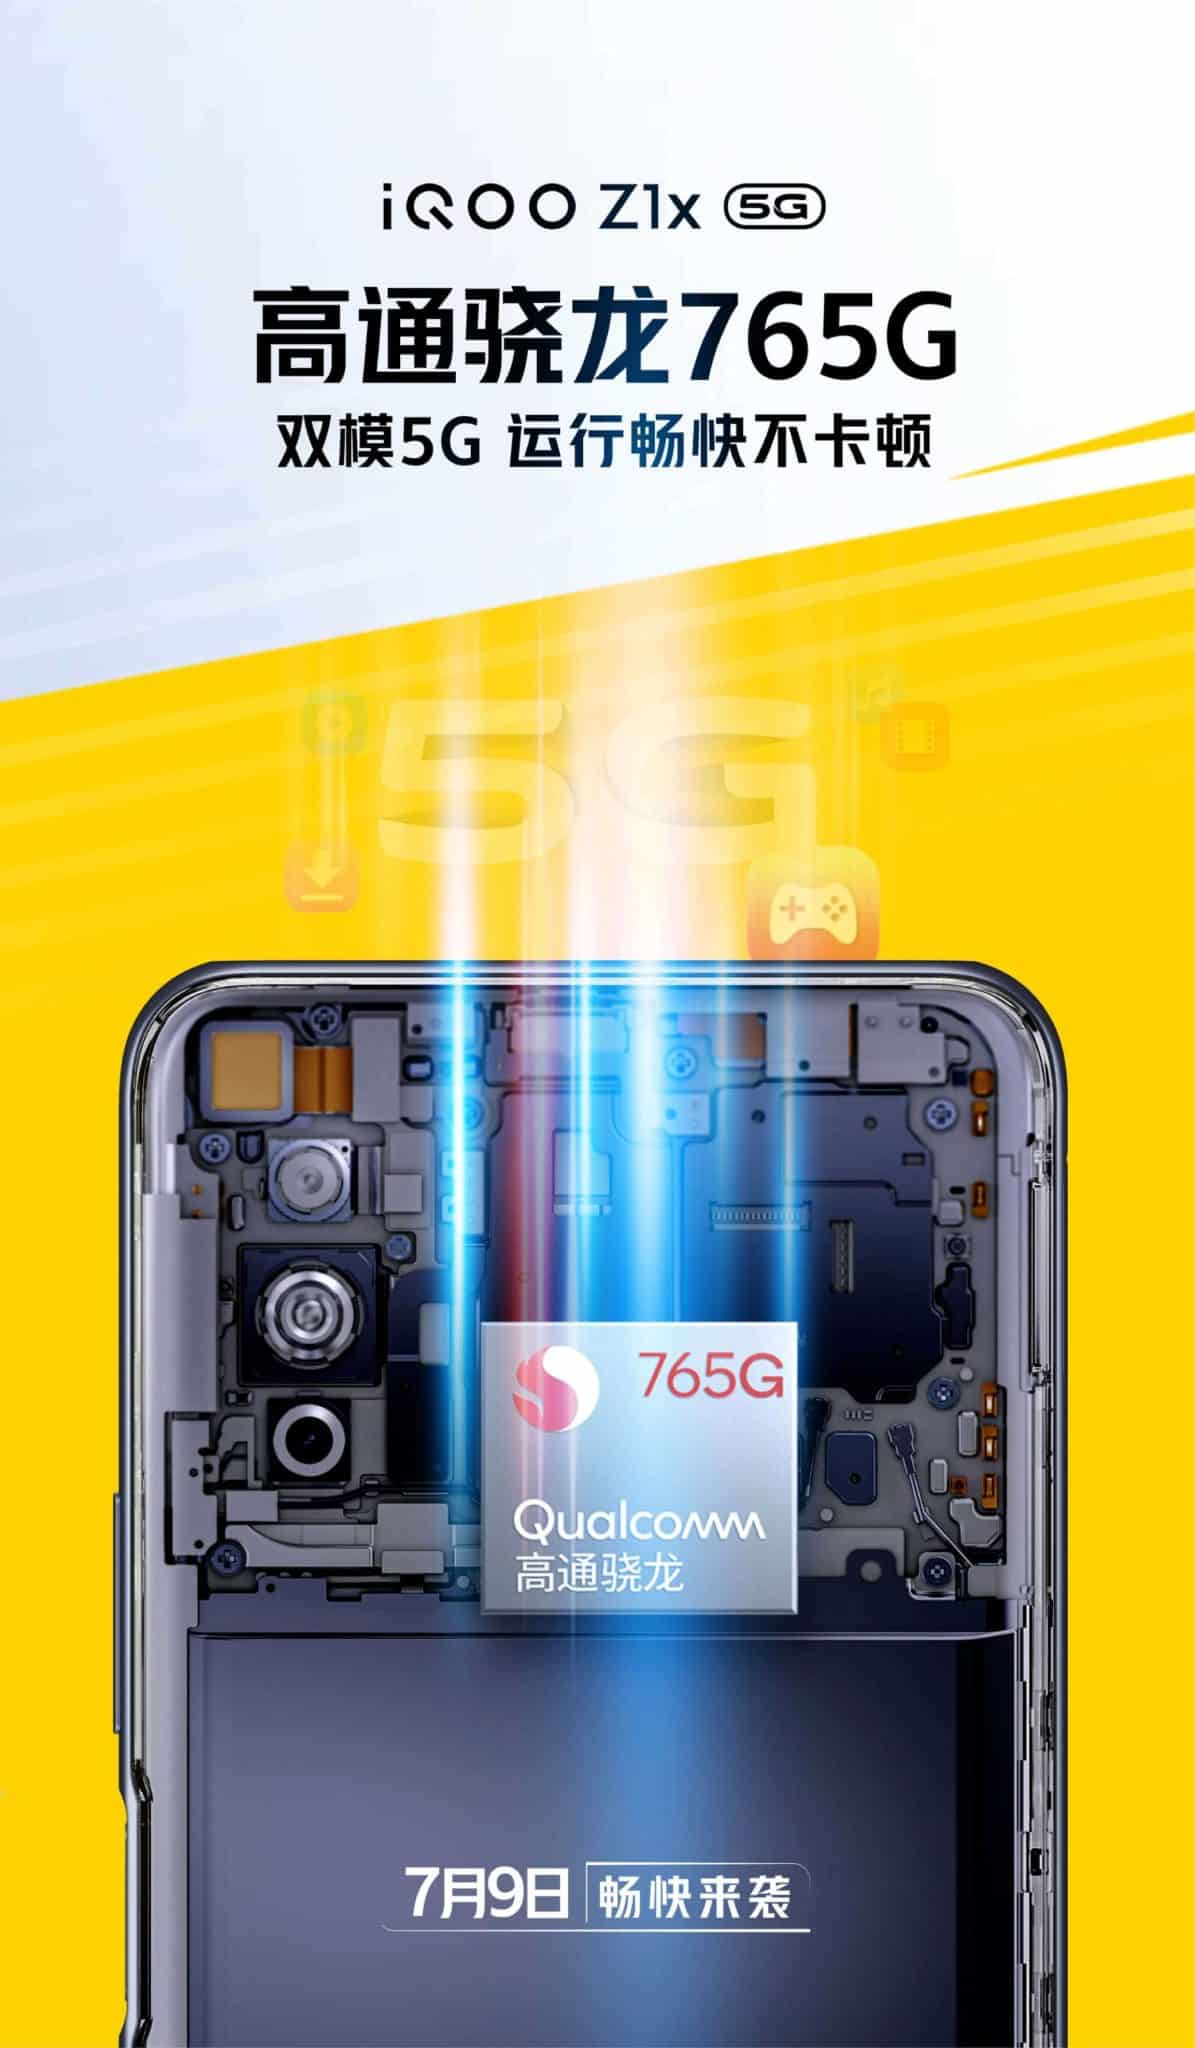 iQOO z1x 5G to have Snapdragon 765G SoC, officially confirmed